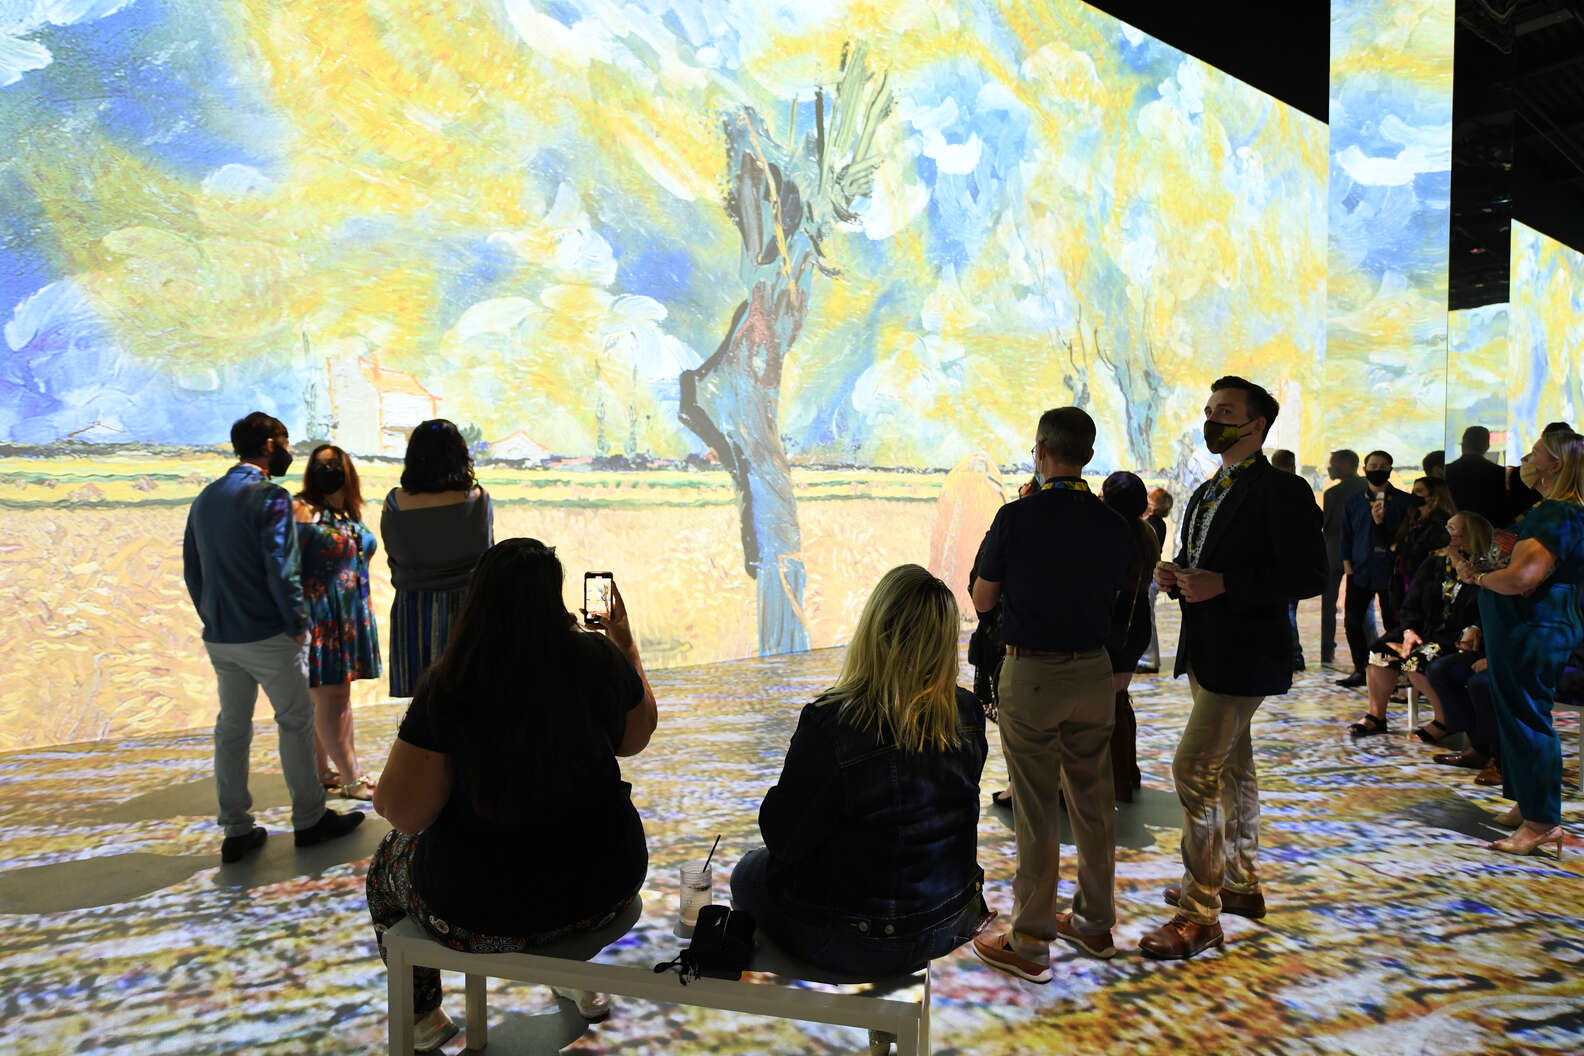 Photo by Denise Truscell, courtesy of Immersive Van Gogh